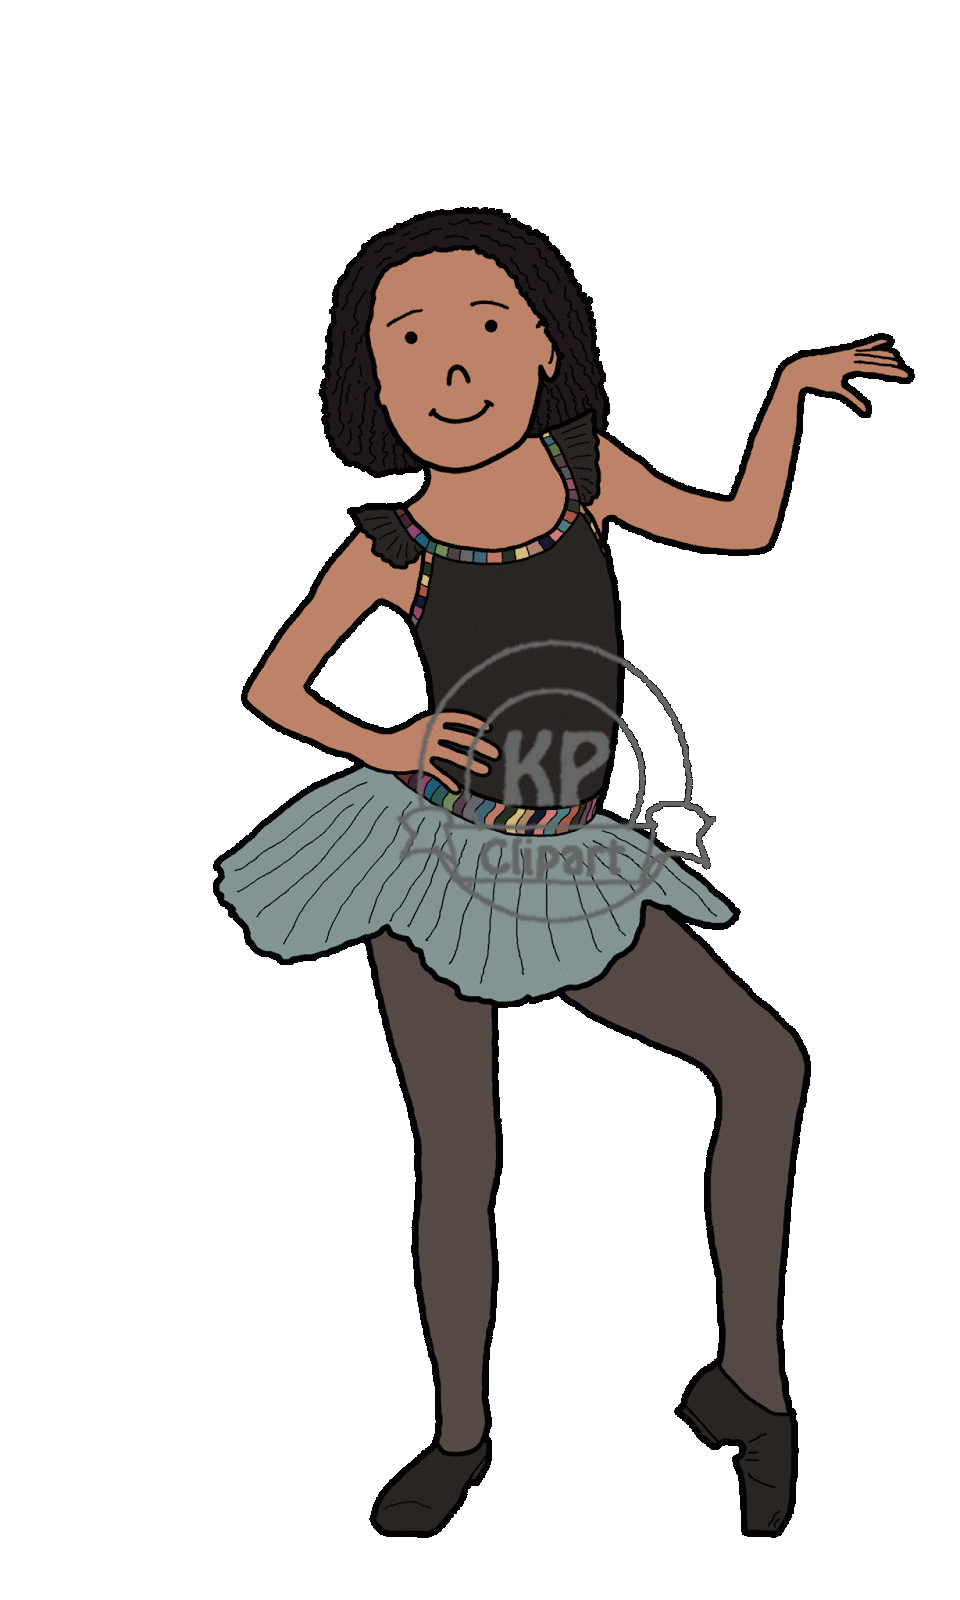 Movement clipart daning. Kp dancing friends and